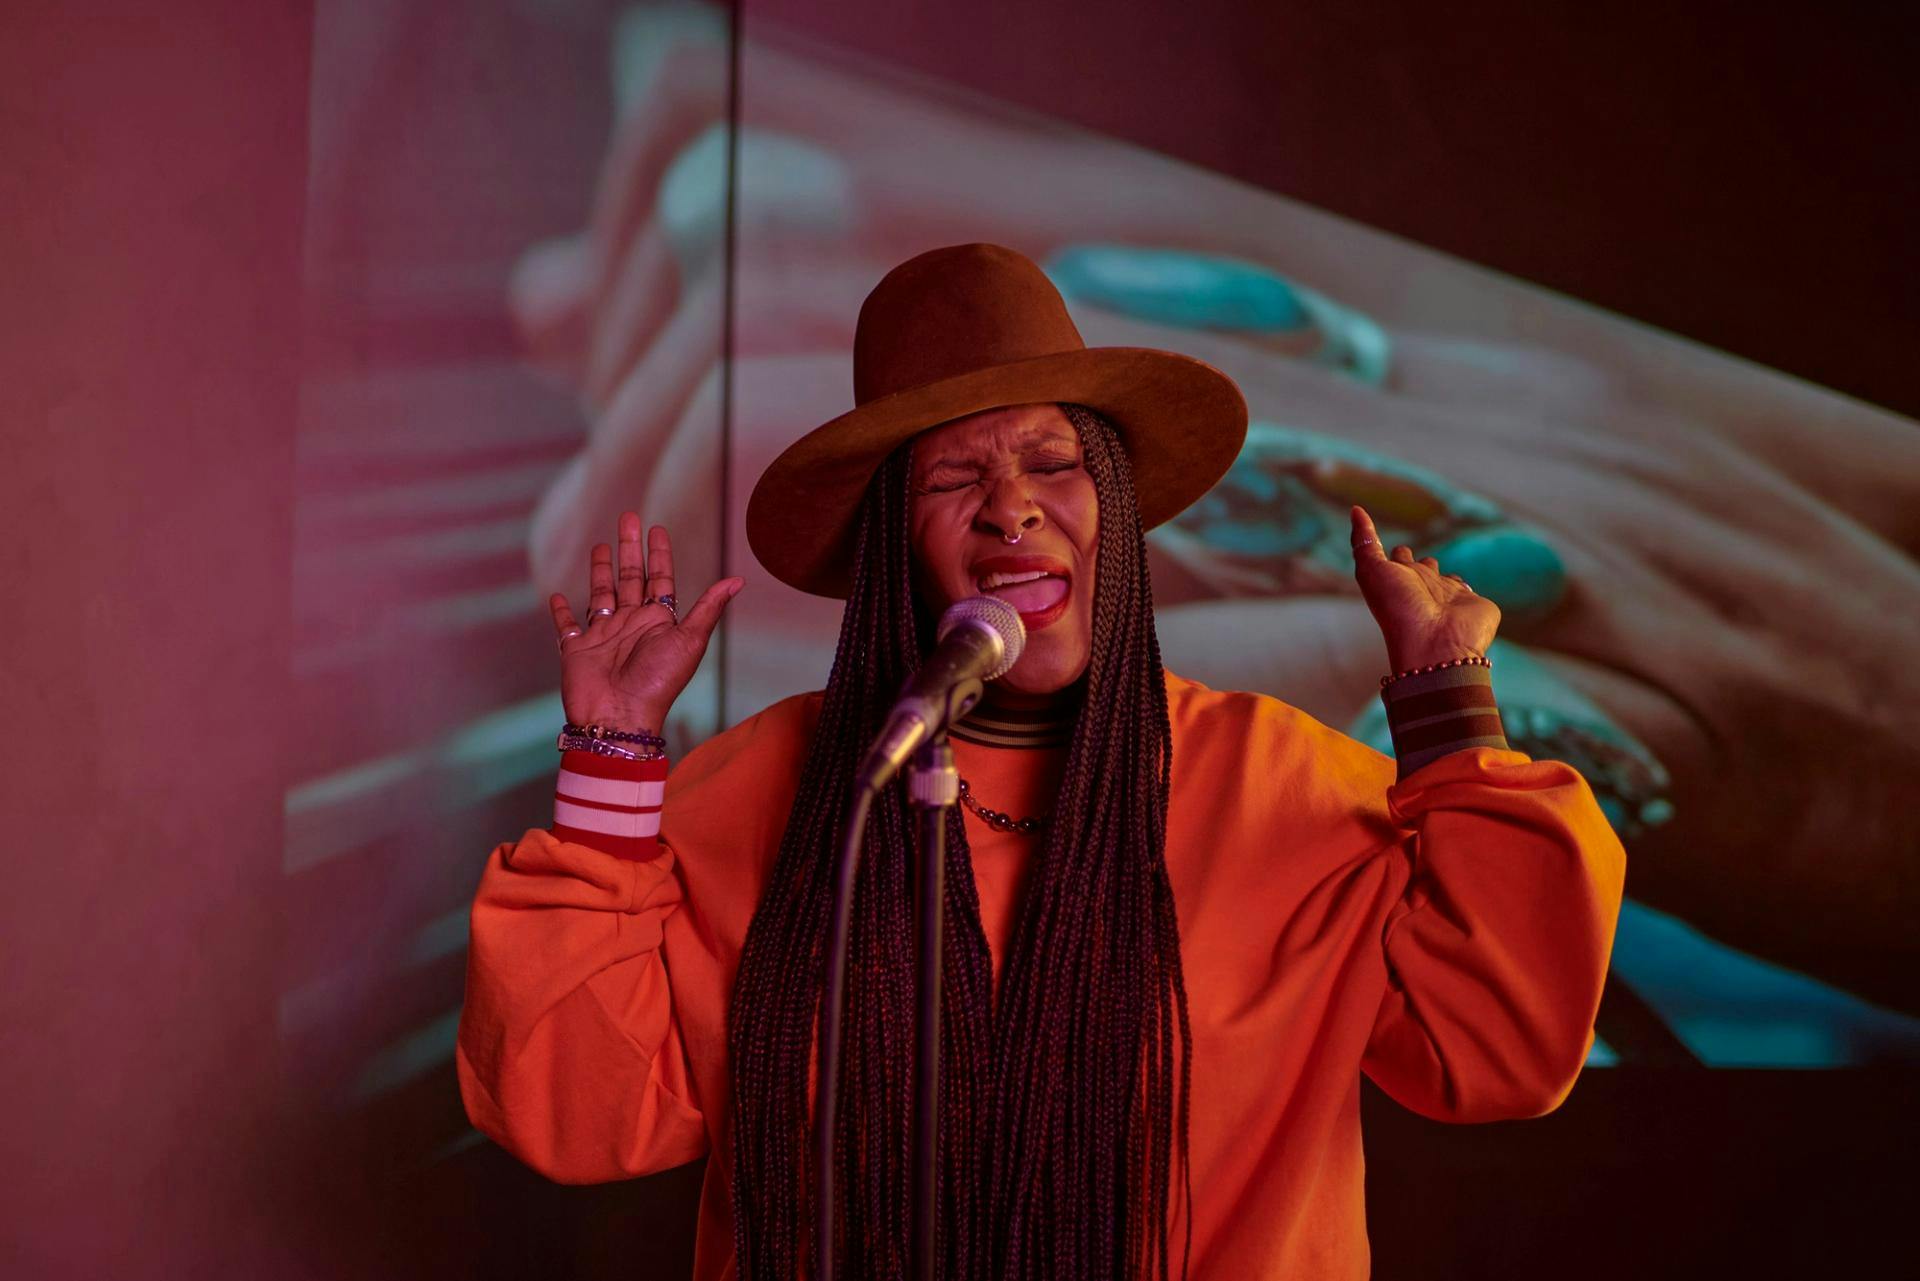 A woman wearing a hat sings into a mic passionately, her eyes closed and hands up